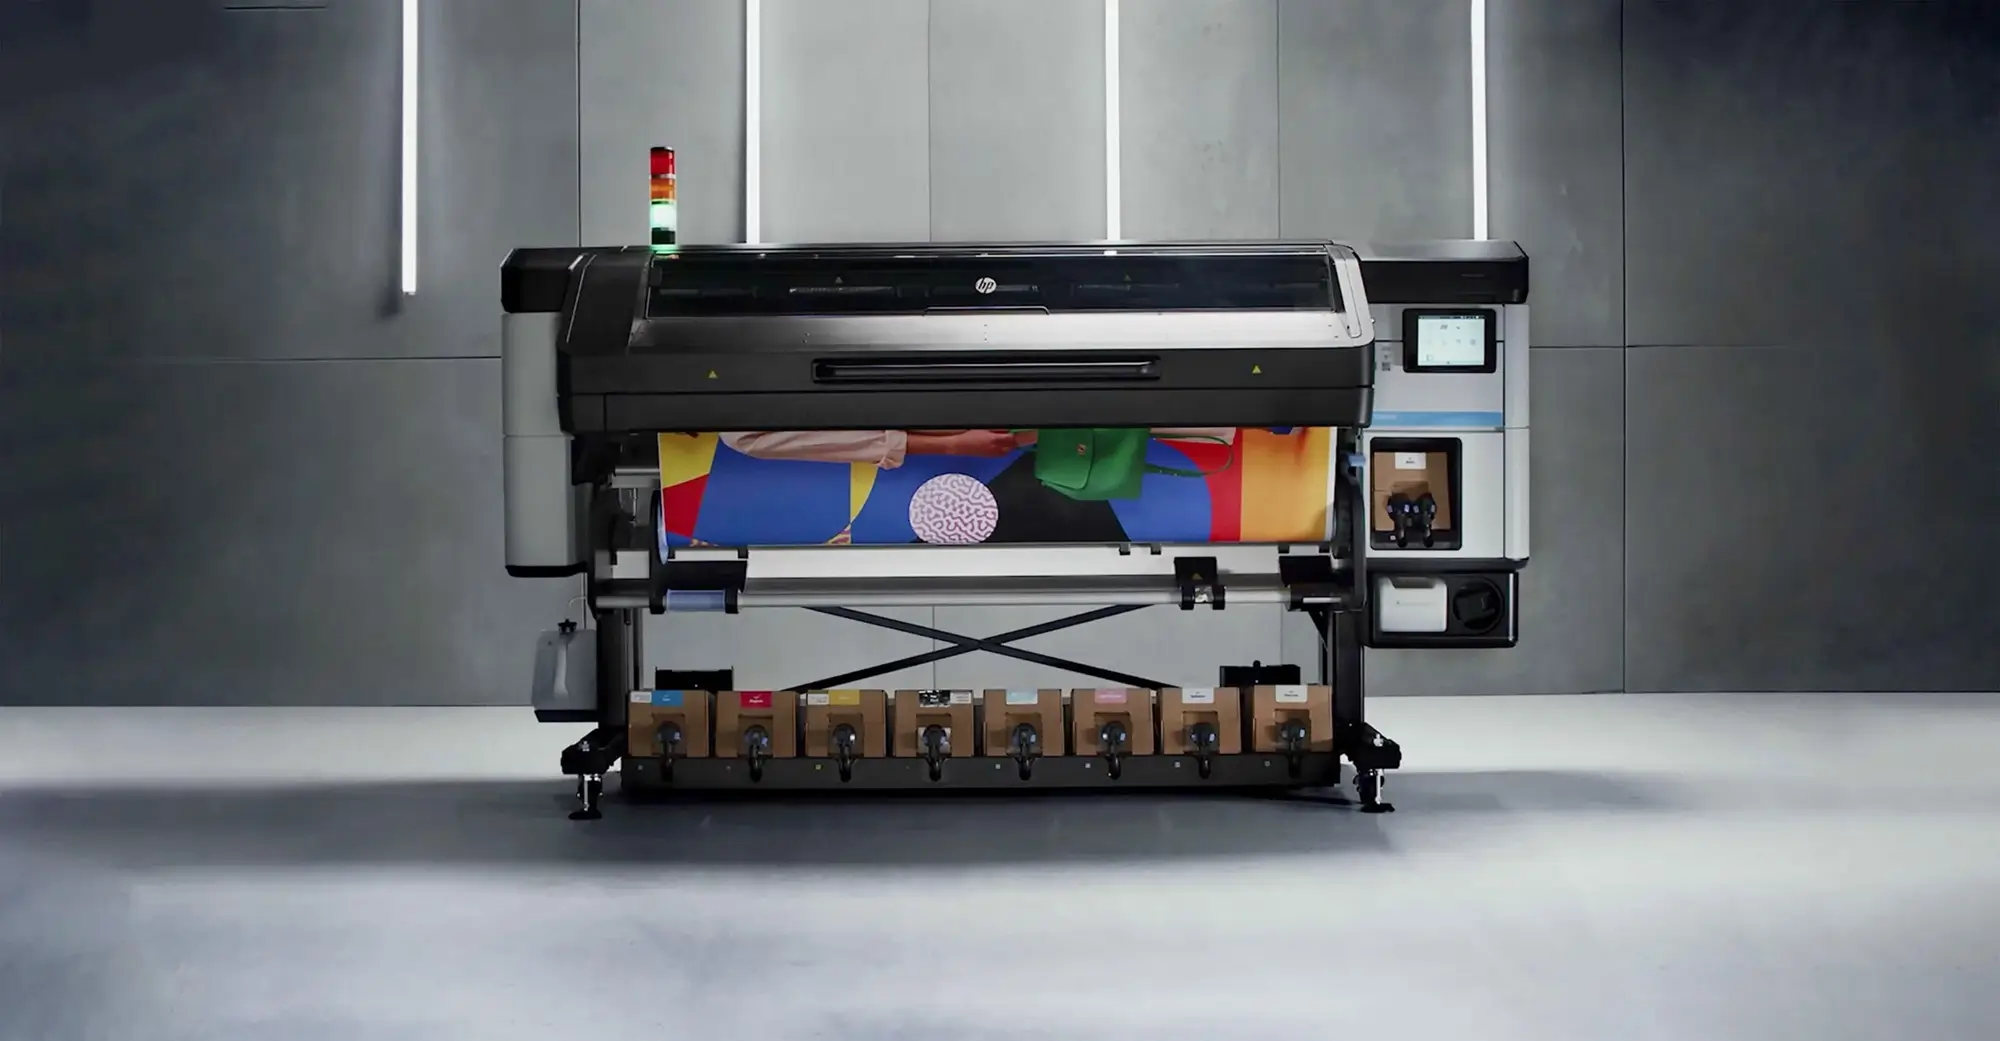 Industrial design of a printer for HP by Nacar Agency